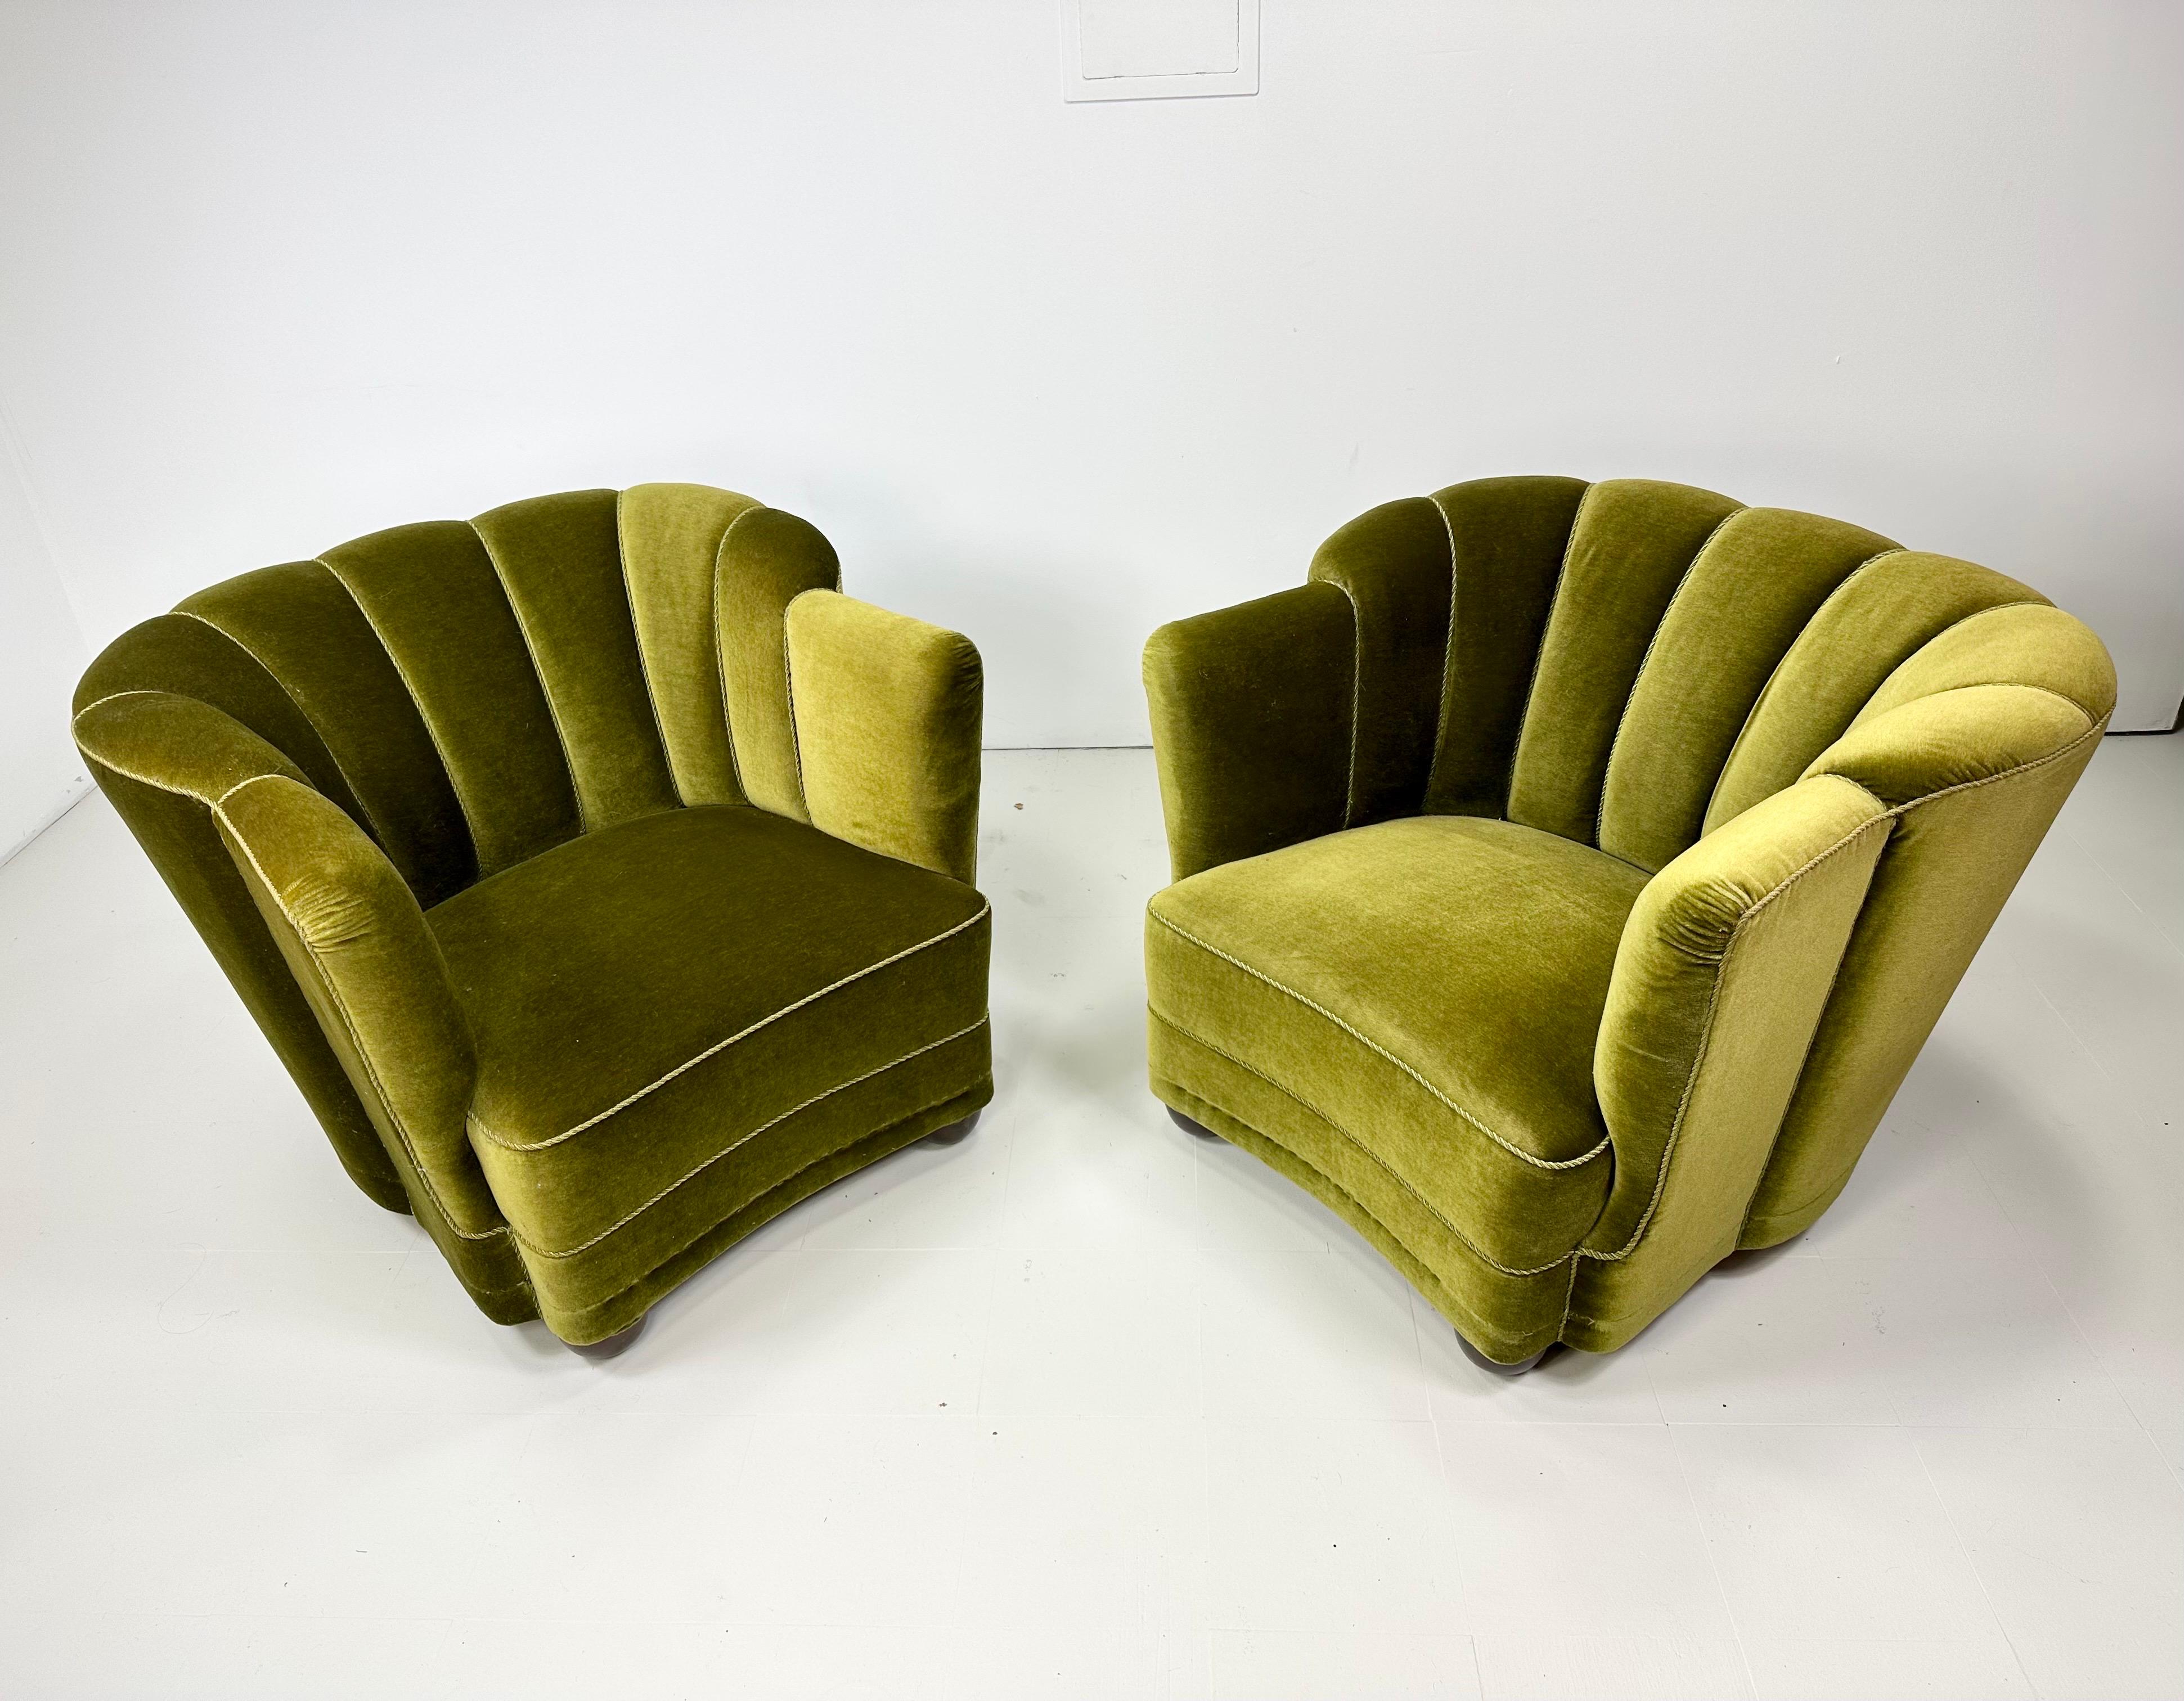 Exceptional pair of 1940’s Danish cabinet maker lounge chairs. Stunning channel tufted green velvet upholstery. Beech wood legs. Upholstery appears to have been updated. Denmark

Delivery to NYC area available for $375. Please inquire.